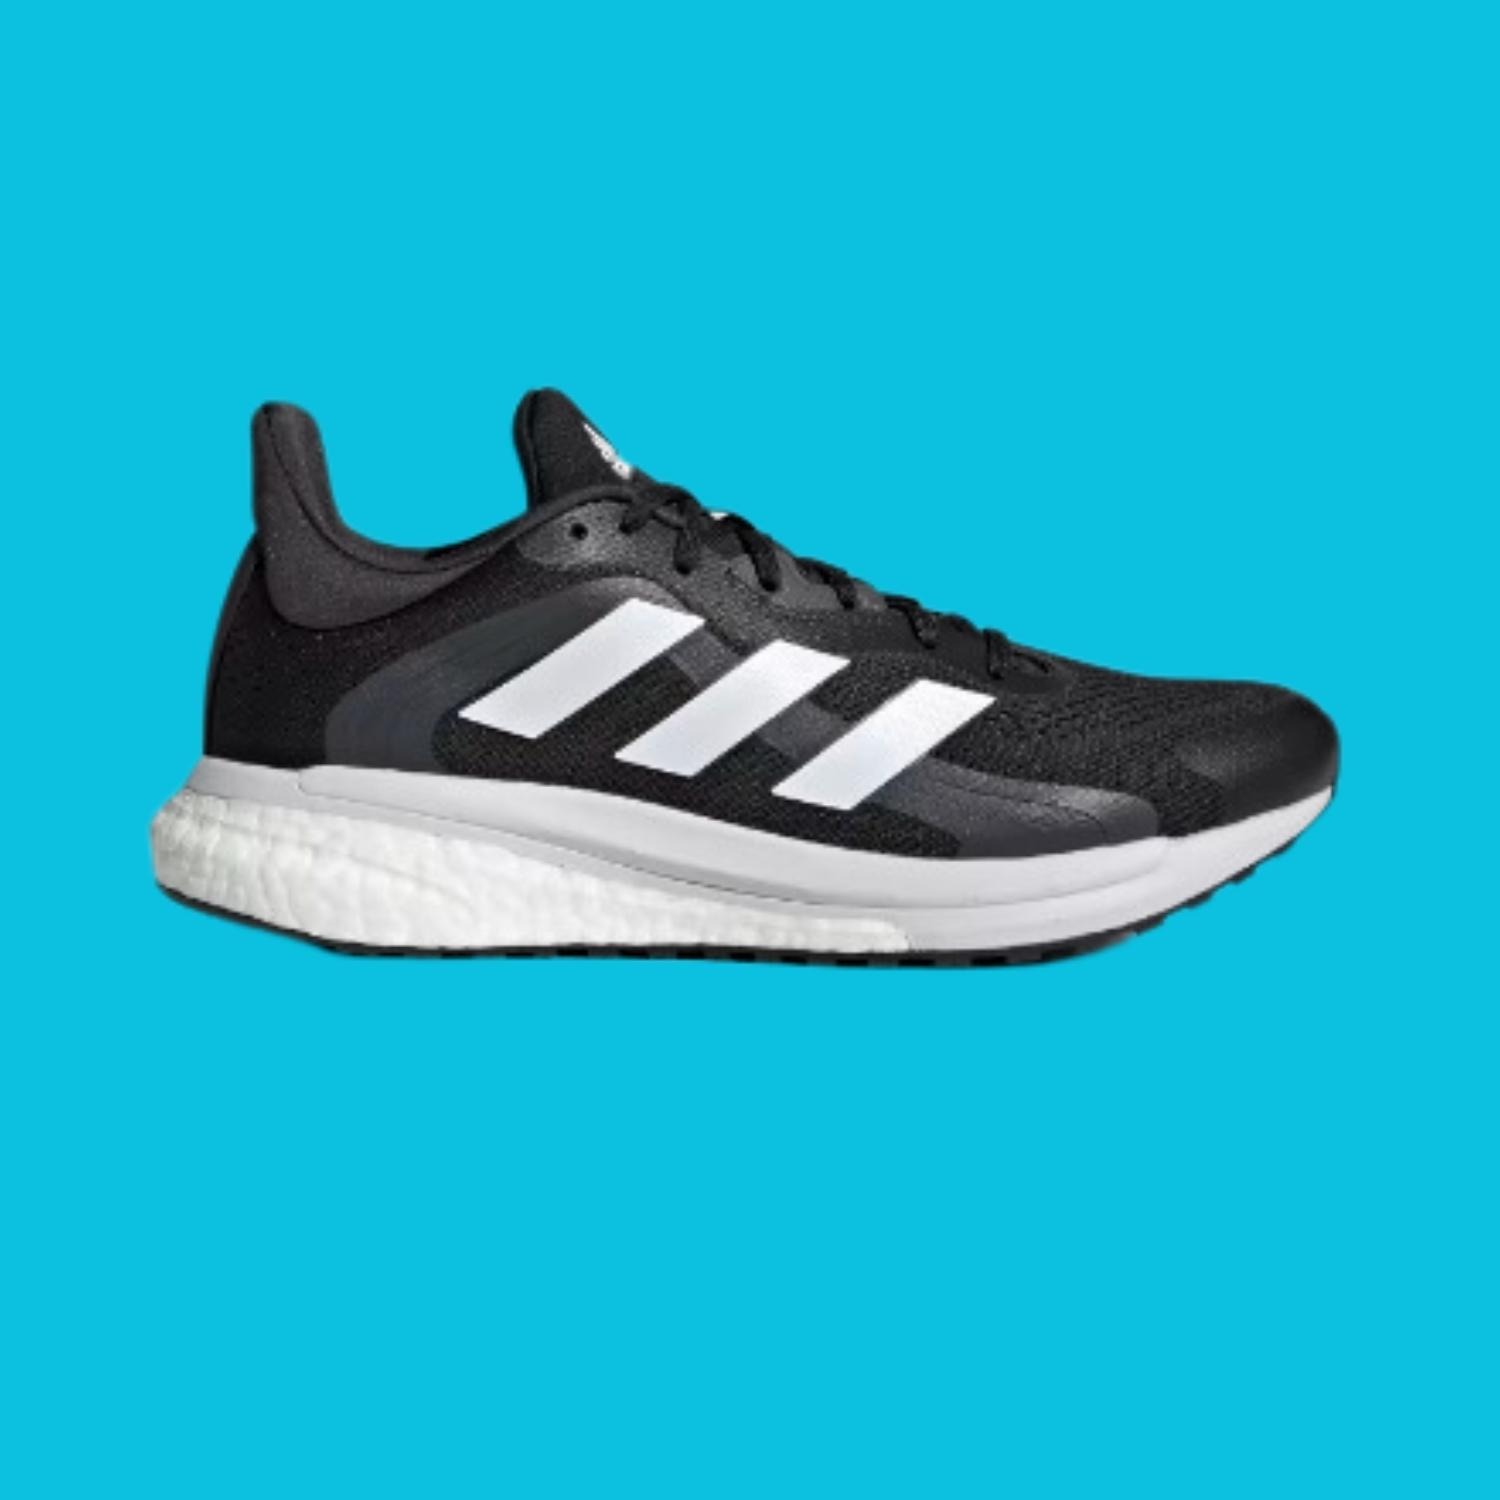 Adidas SolarGlide 4 ST Shoes Review 2023: Step into Excellence